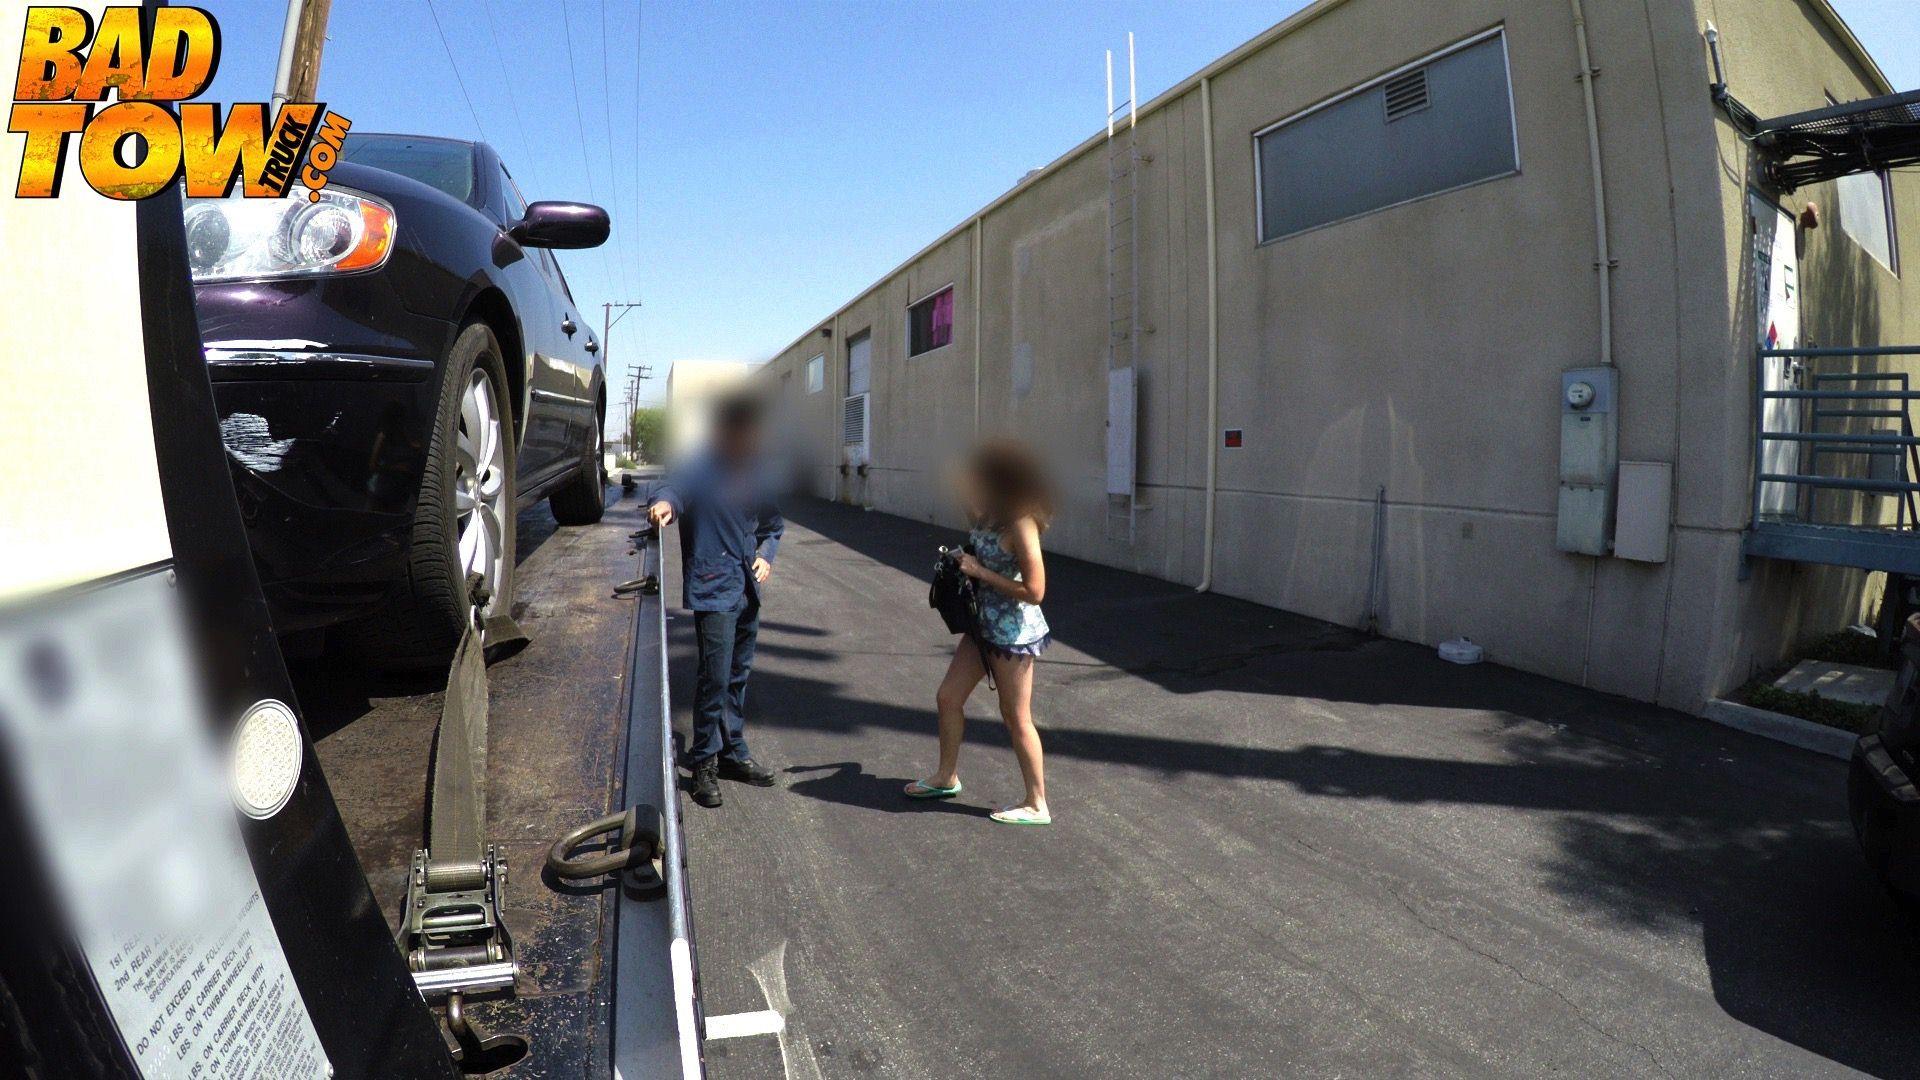 Hot redhead amateur Gwen Stark blows a tow truck driver to get her car back #54592857